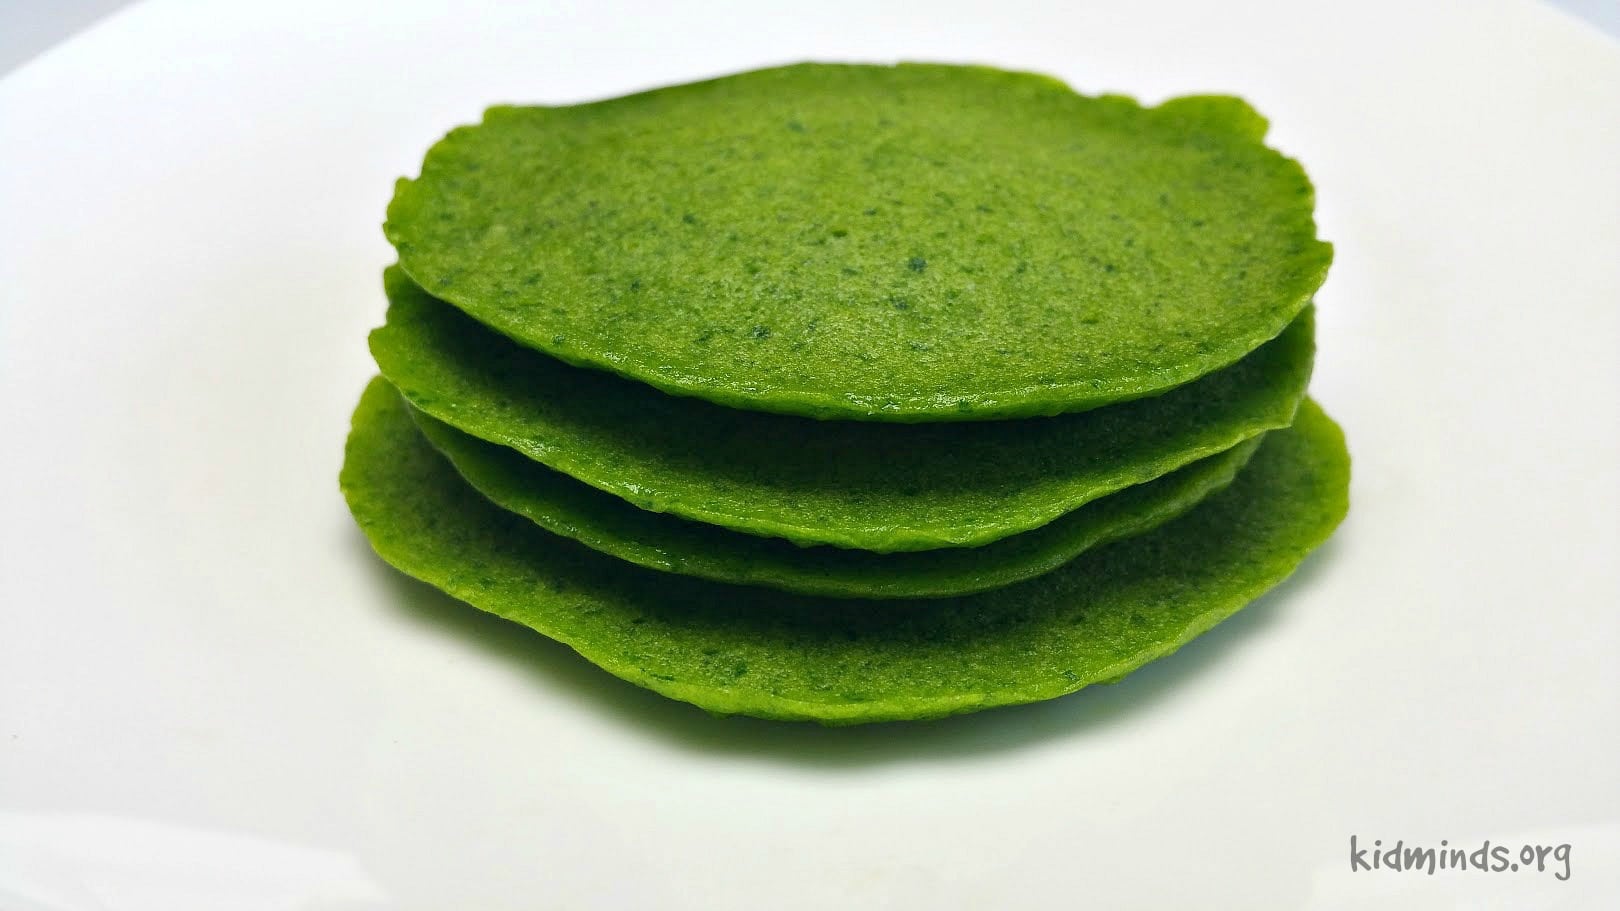 Green pancakes without artificial Colorings.  The rich, green color comes from fresh, nutritious spinach! 